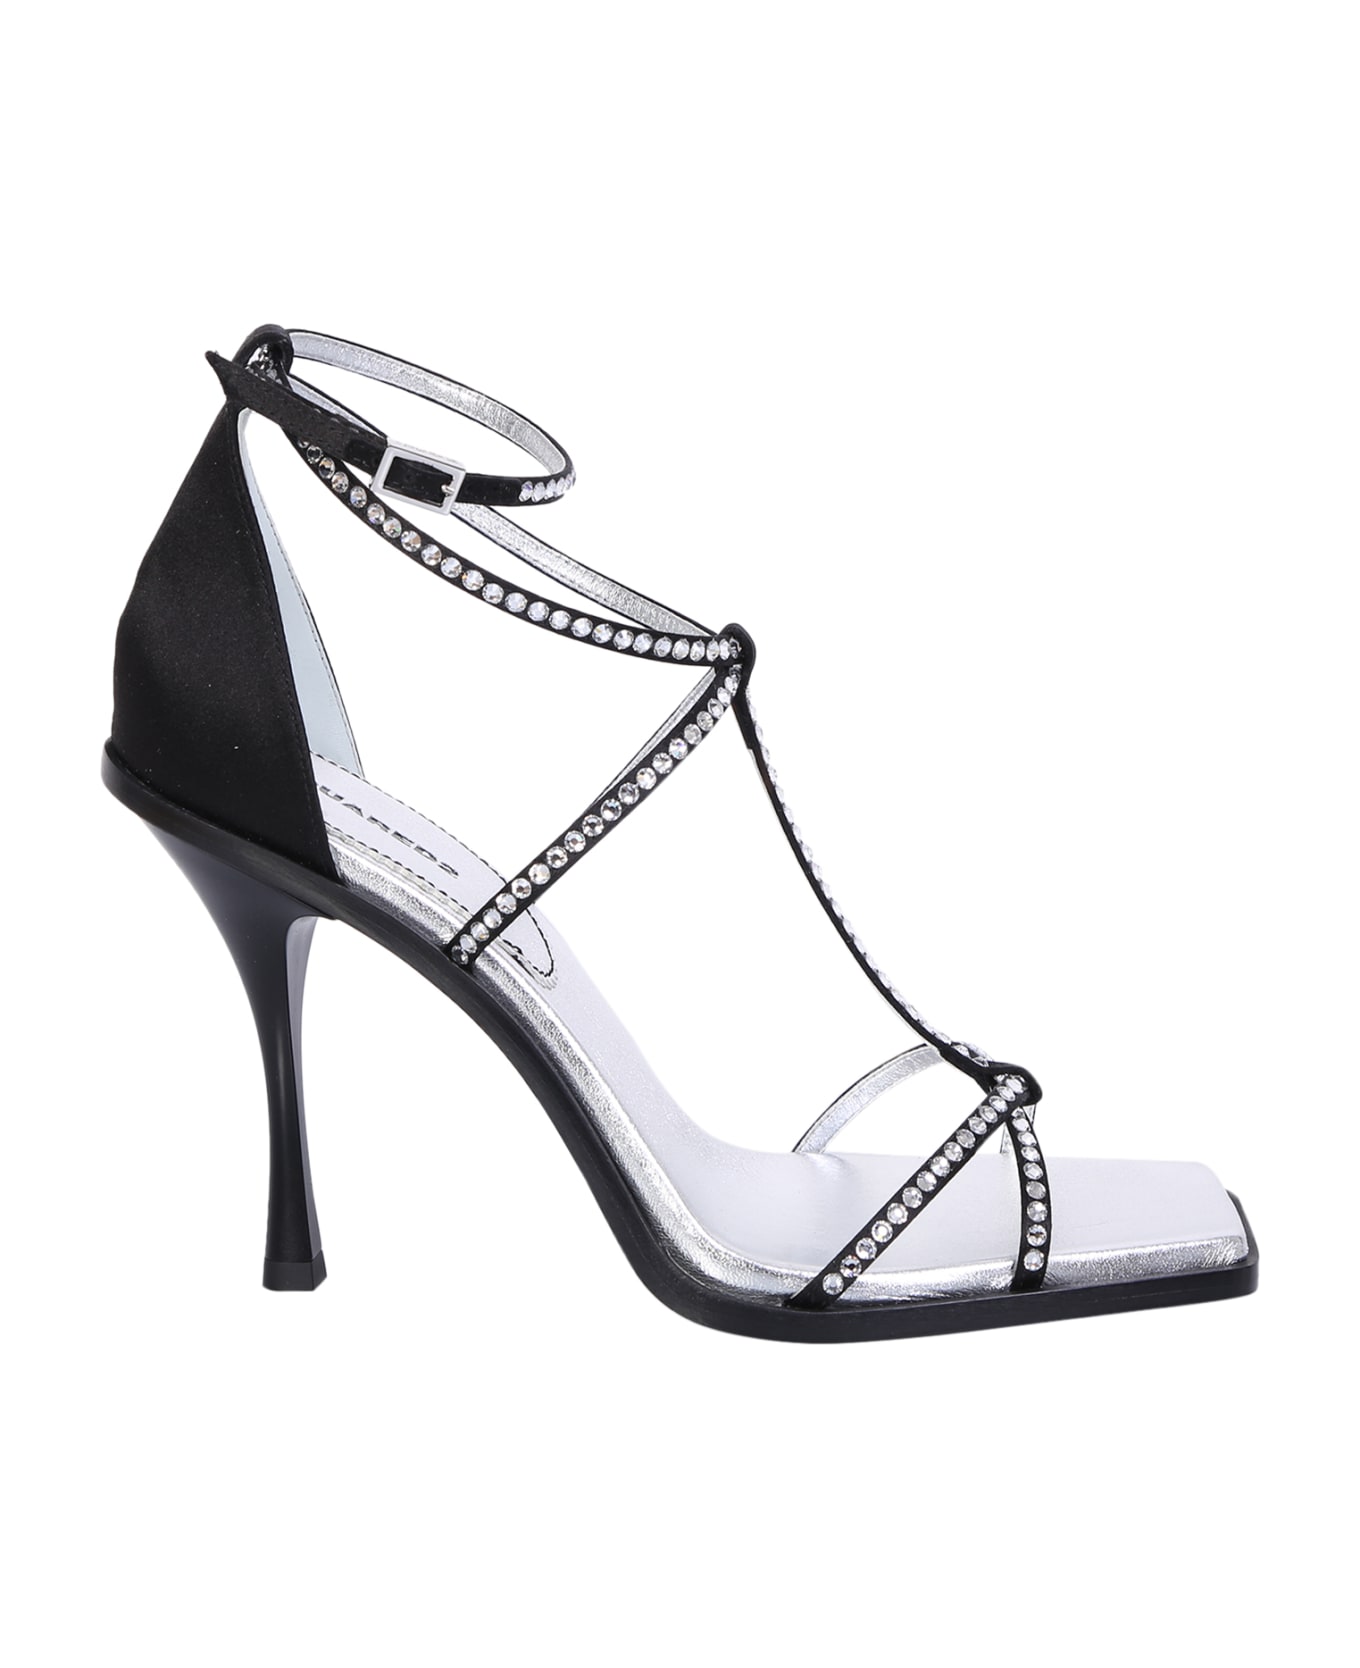 Dsquared2 Ankle Strap Sandals - Black サンダル